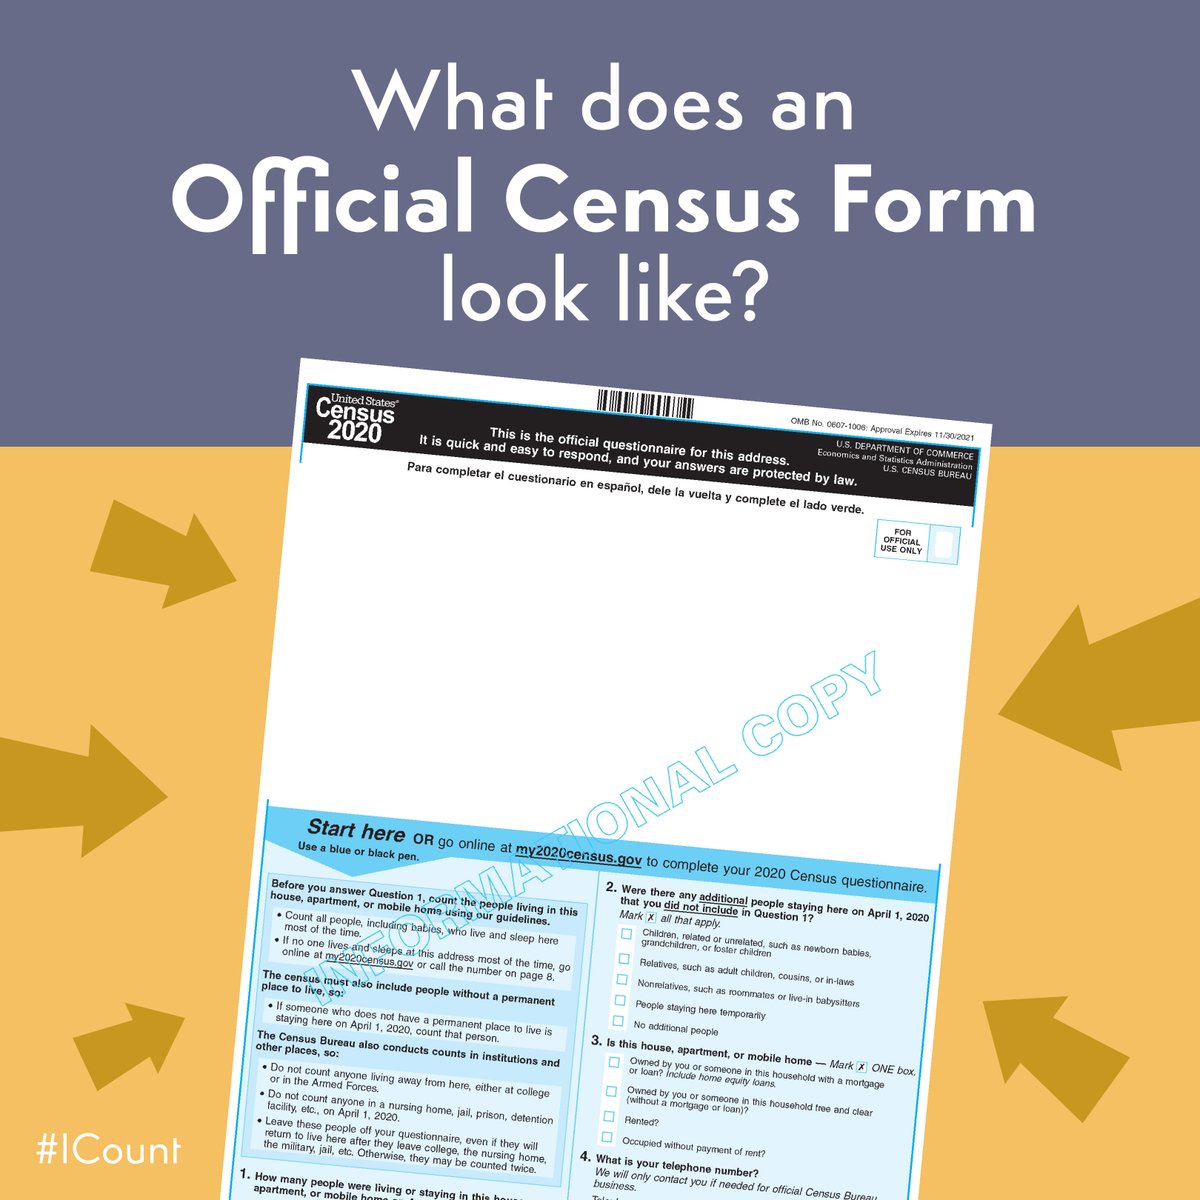 Help ensure resources come back to your family by taking the Census! If you haven’t responded yet, you can also participate online now at my2020census.gov or by calling 844-330-2020. #CaliforniaForAll #ICount #IECounts #2020Census #HasmeContar #CountMeIn #ucrcounts #ucr